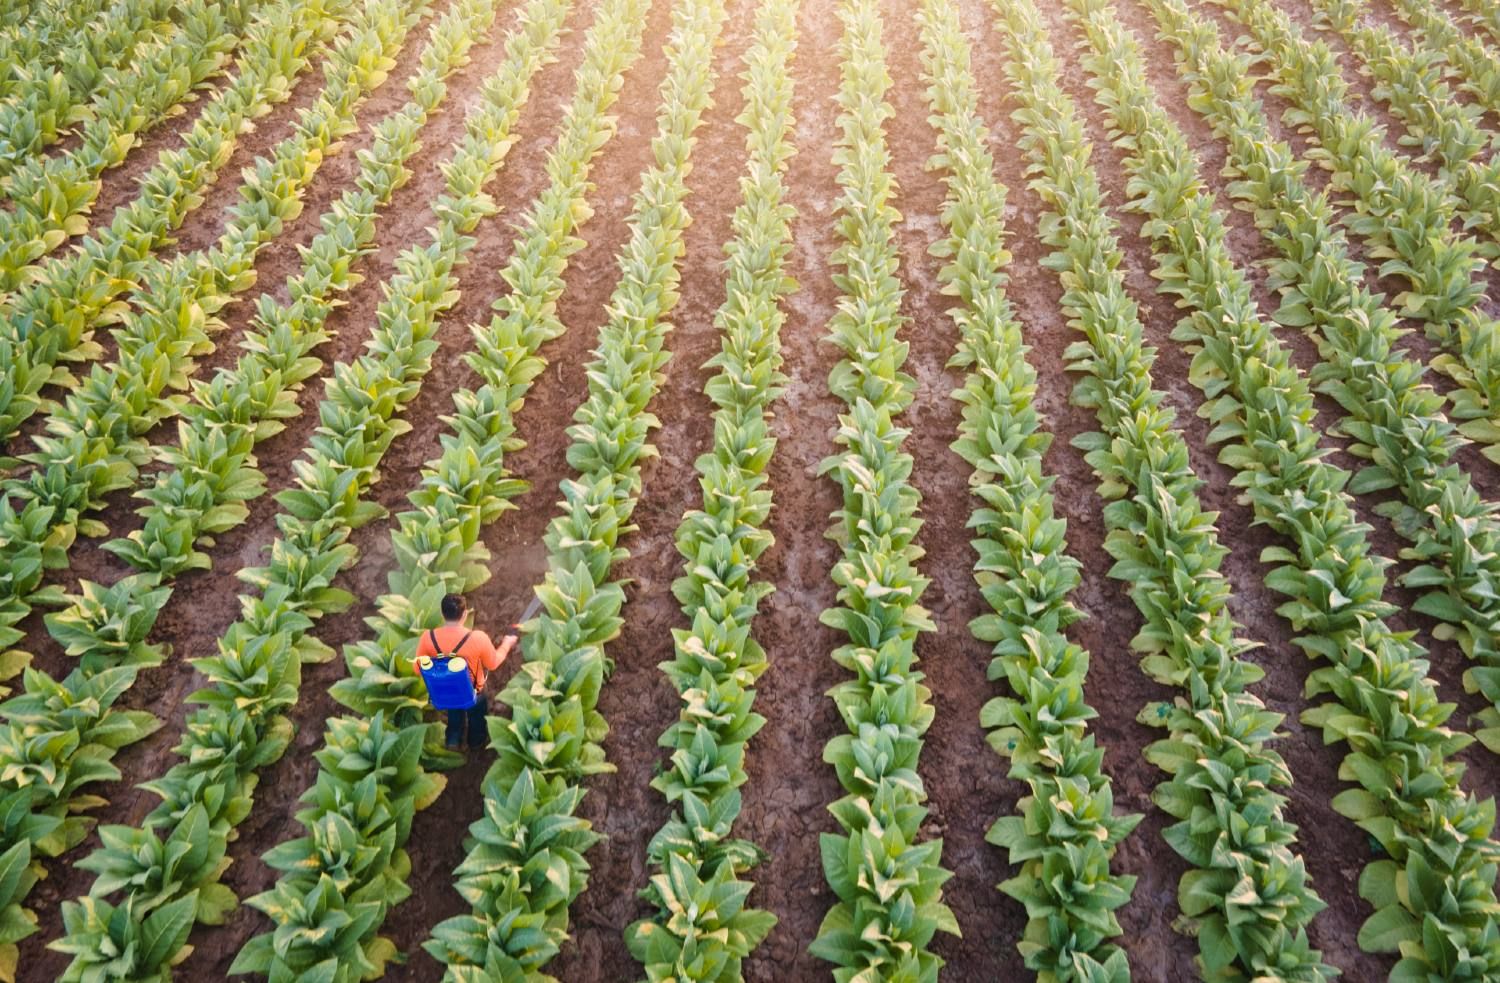 A man sprays weed killer on rows of tobacco crops - roundup